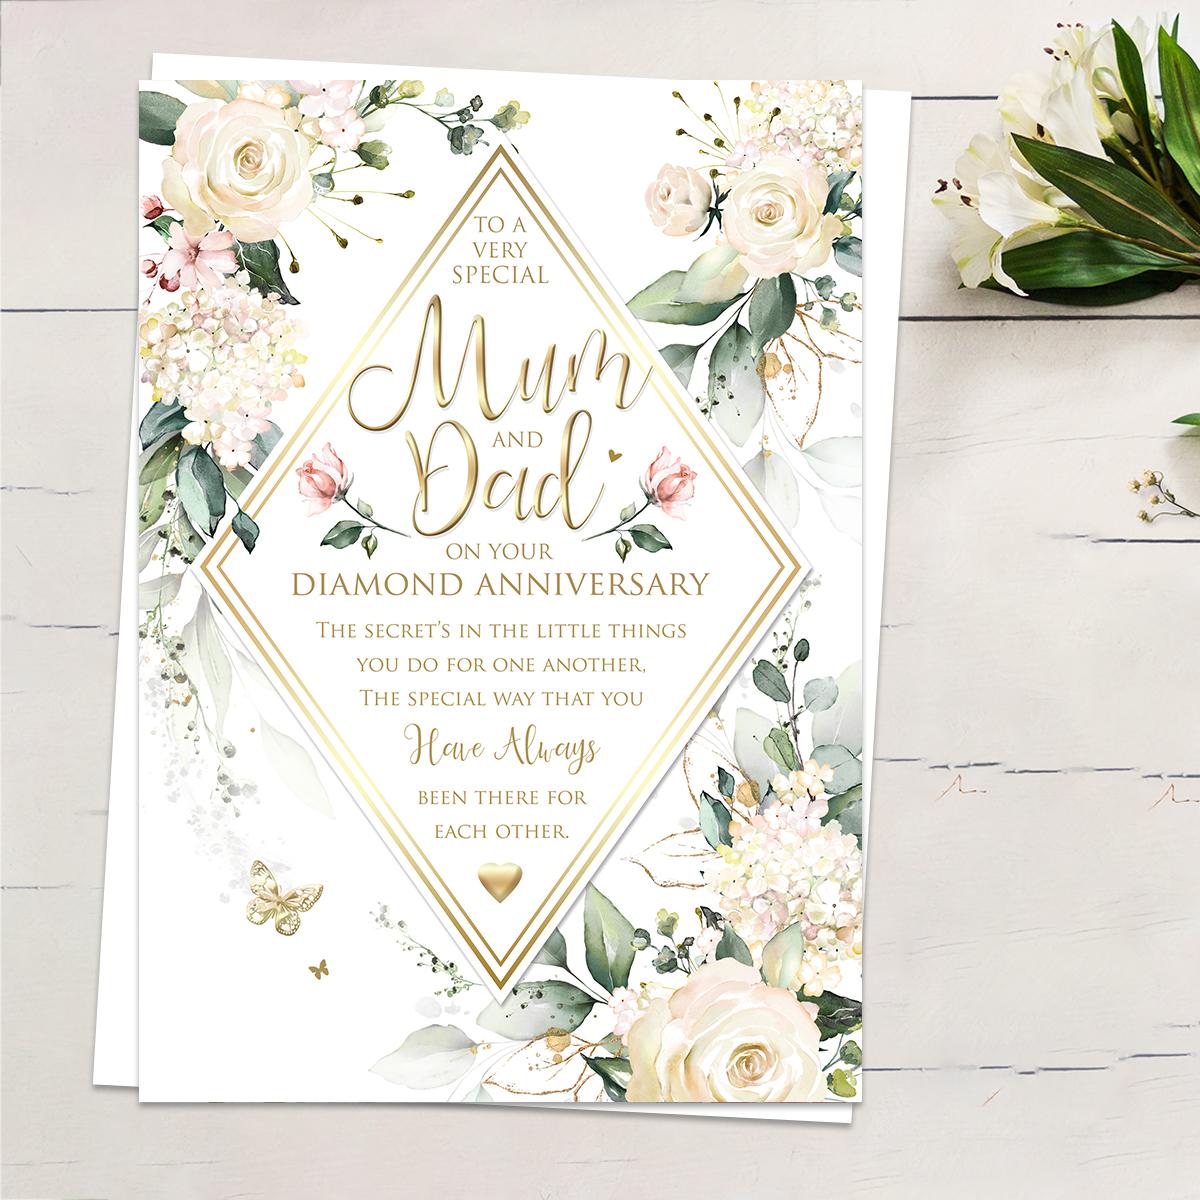 ' To A Very Special Mum And Dad On Your Diamond Anniversary' Featuring Cream And White Flowers And Gold Foiled Butterflies. Complete With White Envelope